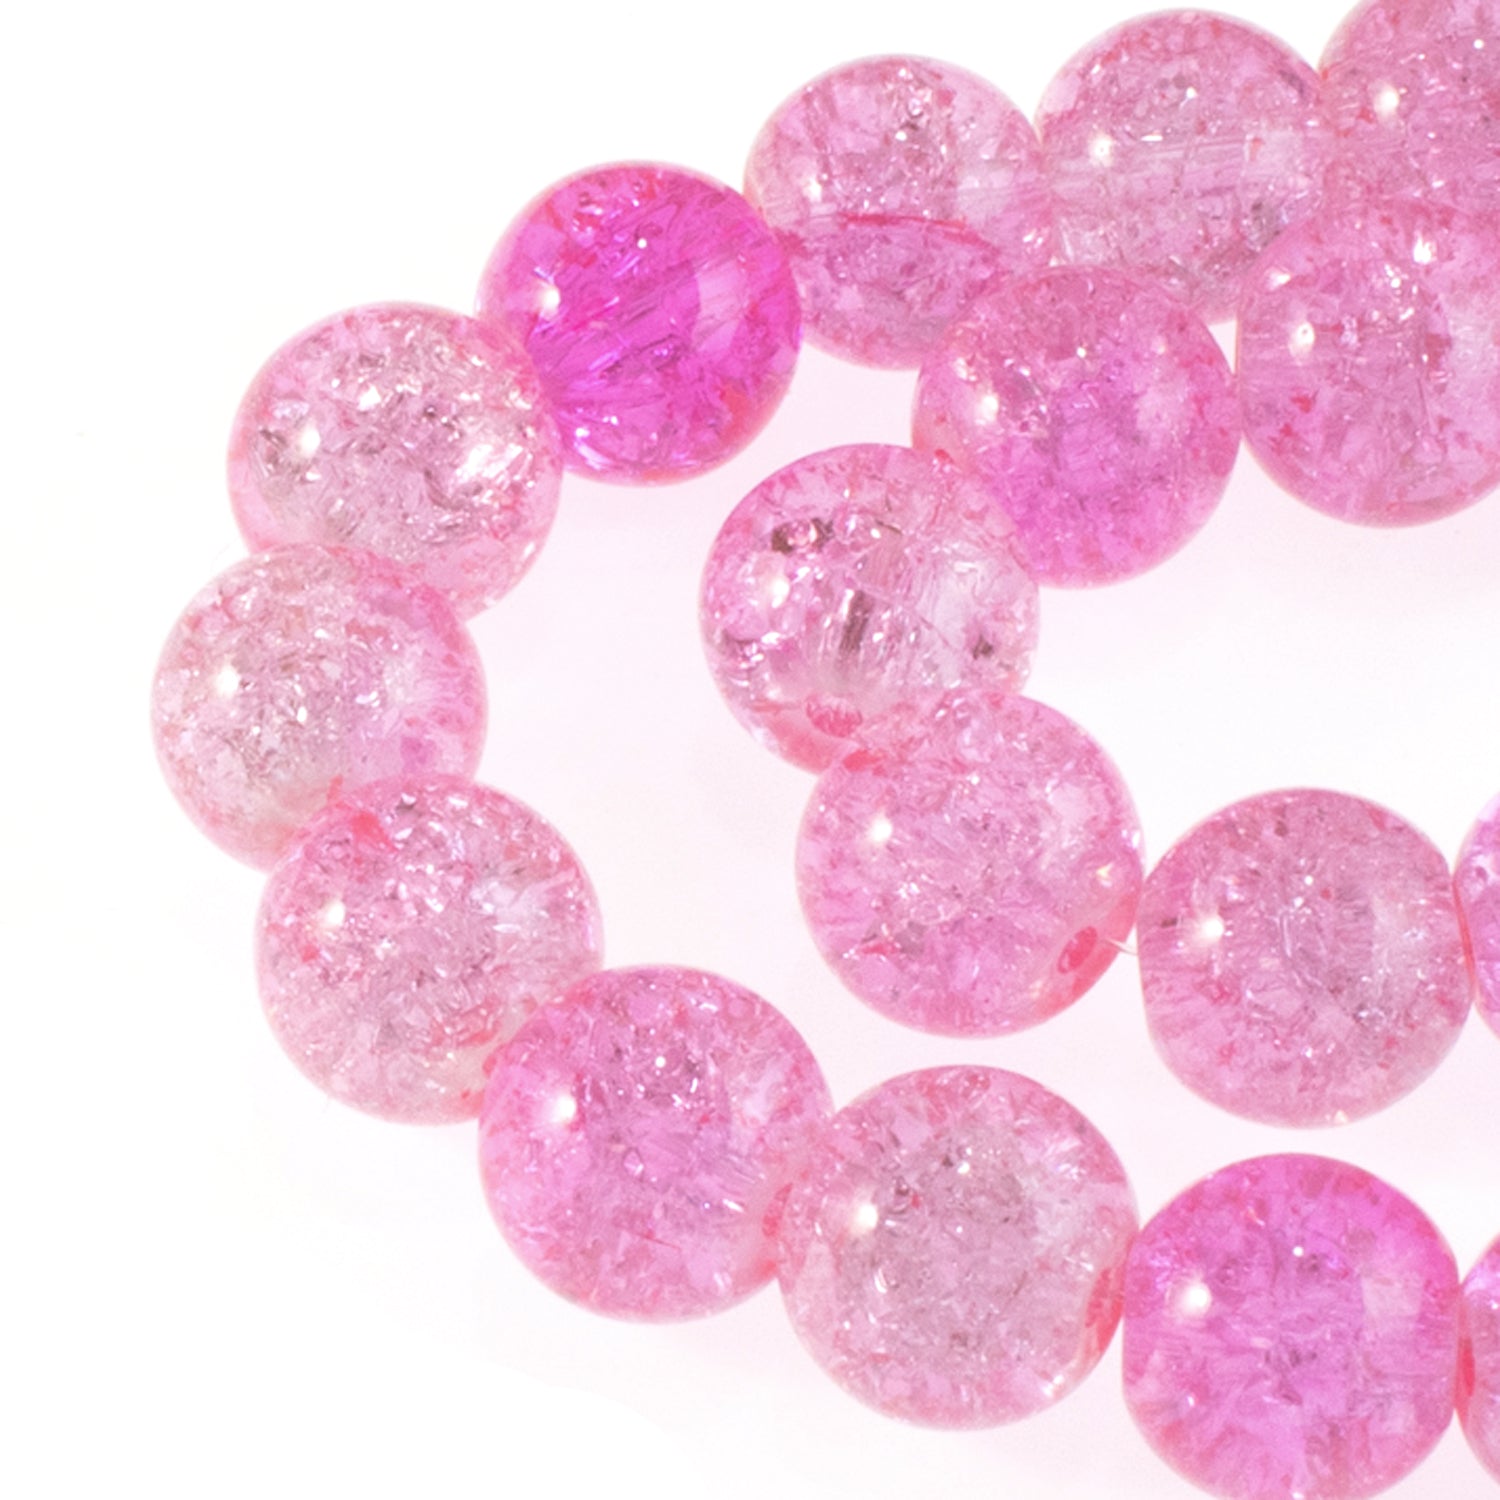 10mm Clear Round Glass Crackle Beads | Hackberry Creek